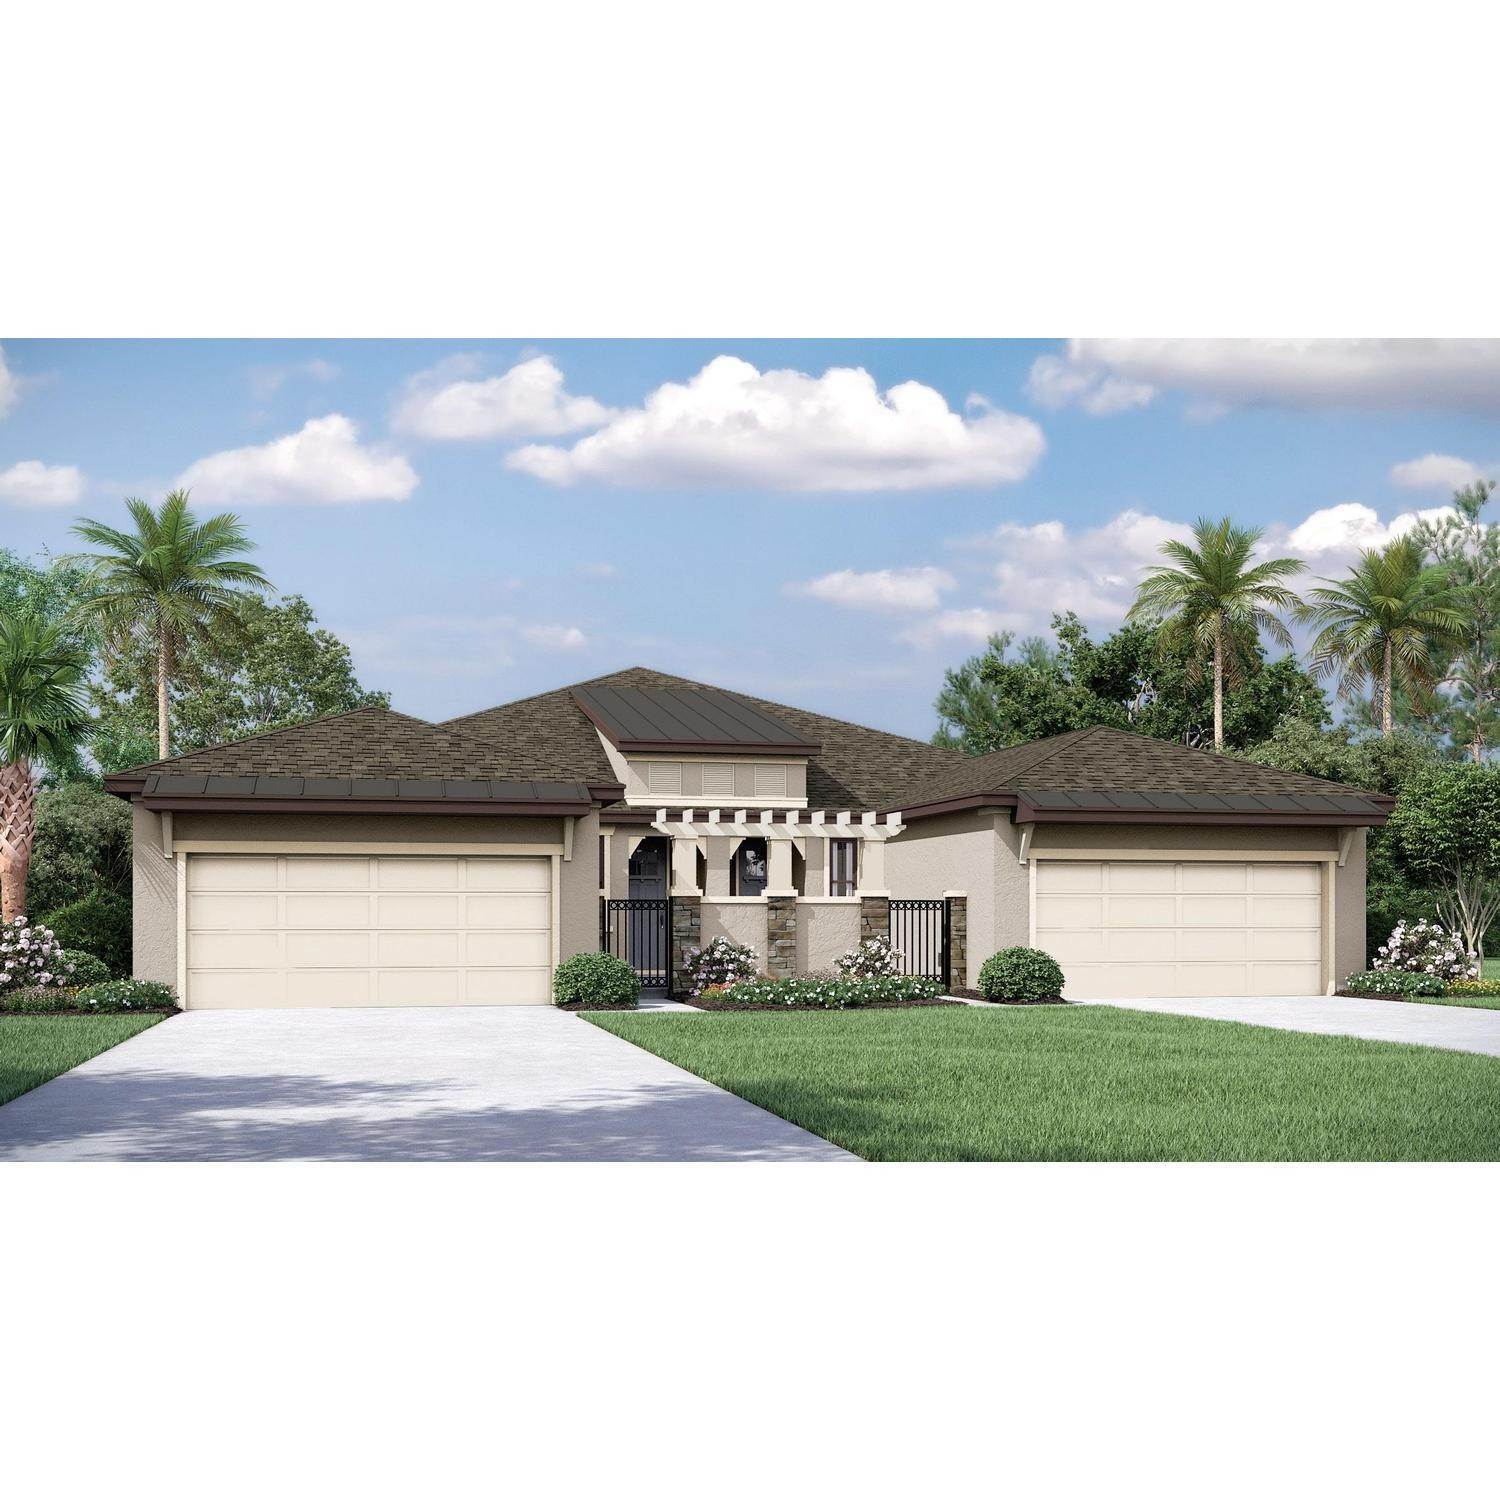 Multi Family for Sale at Lutz, FL 33549